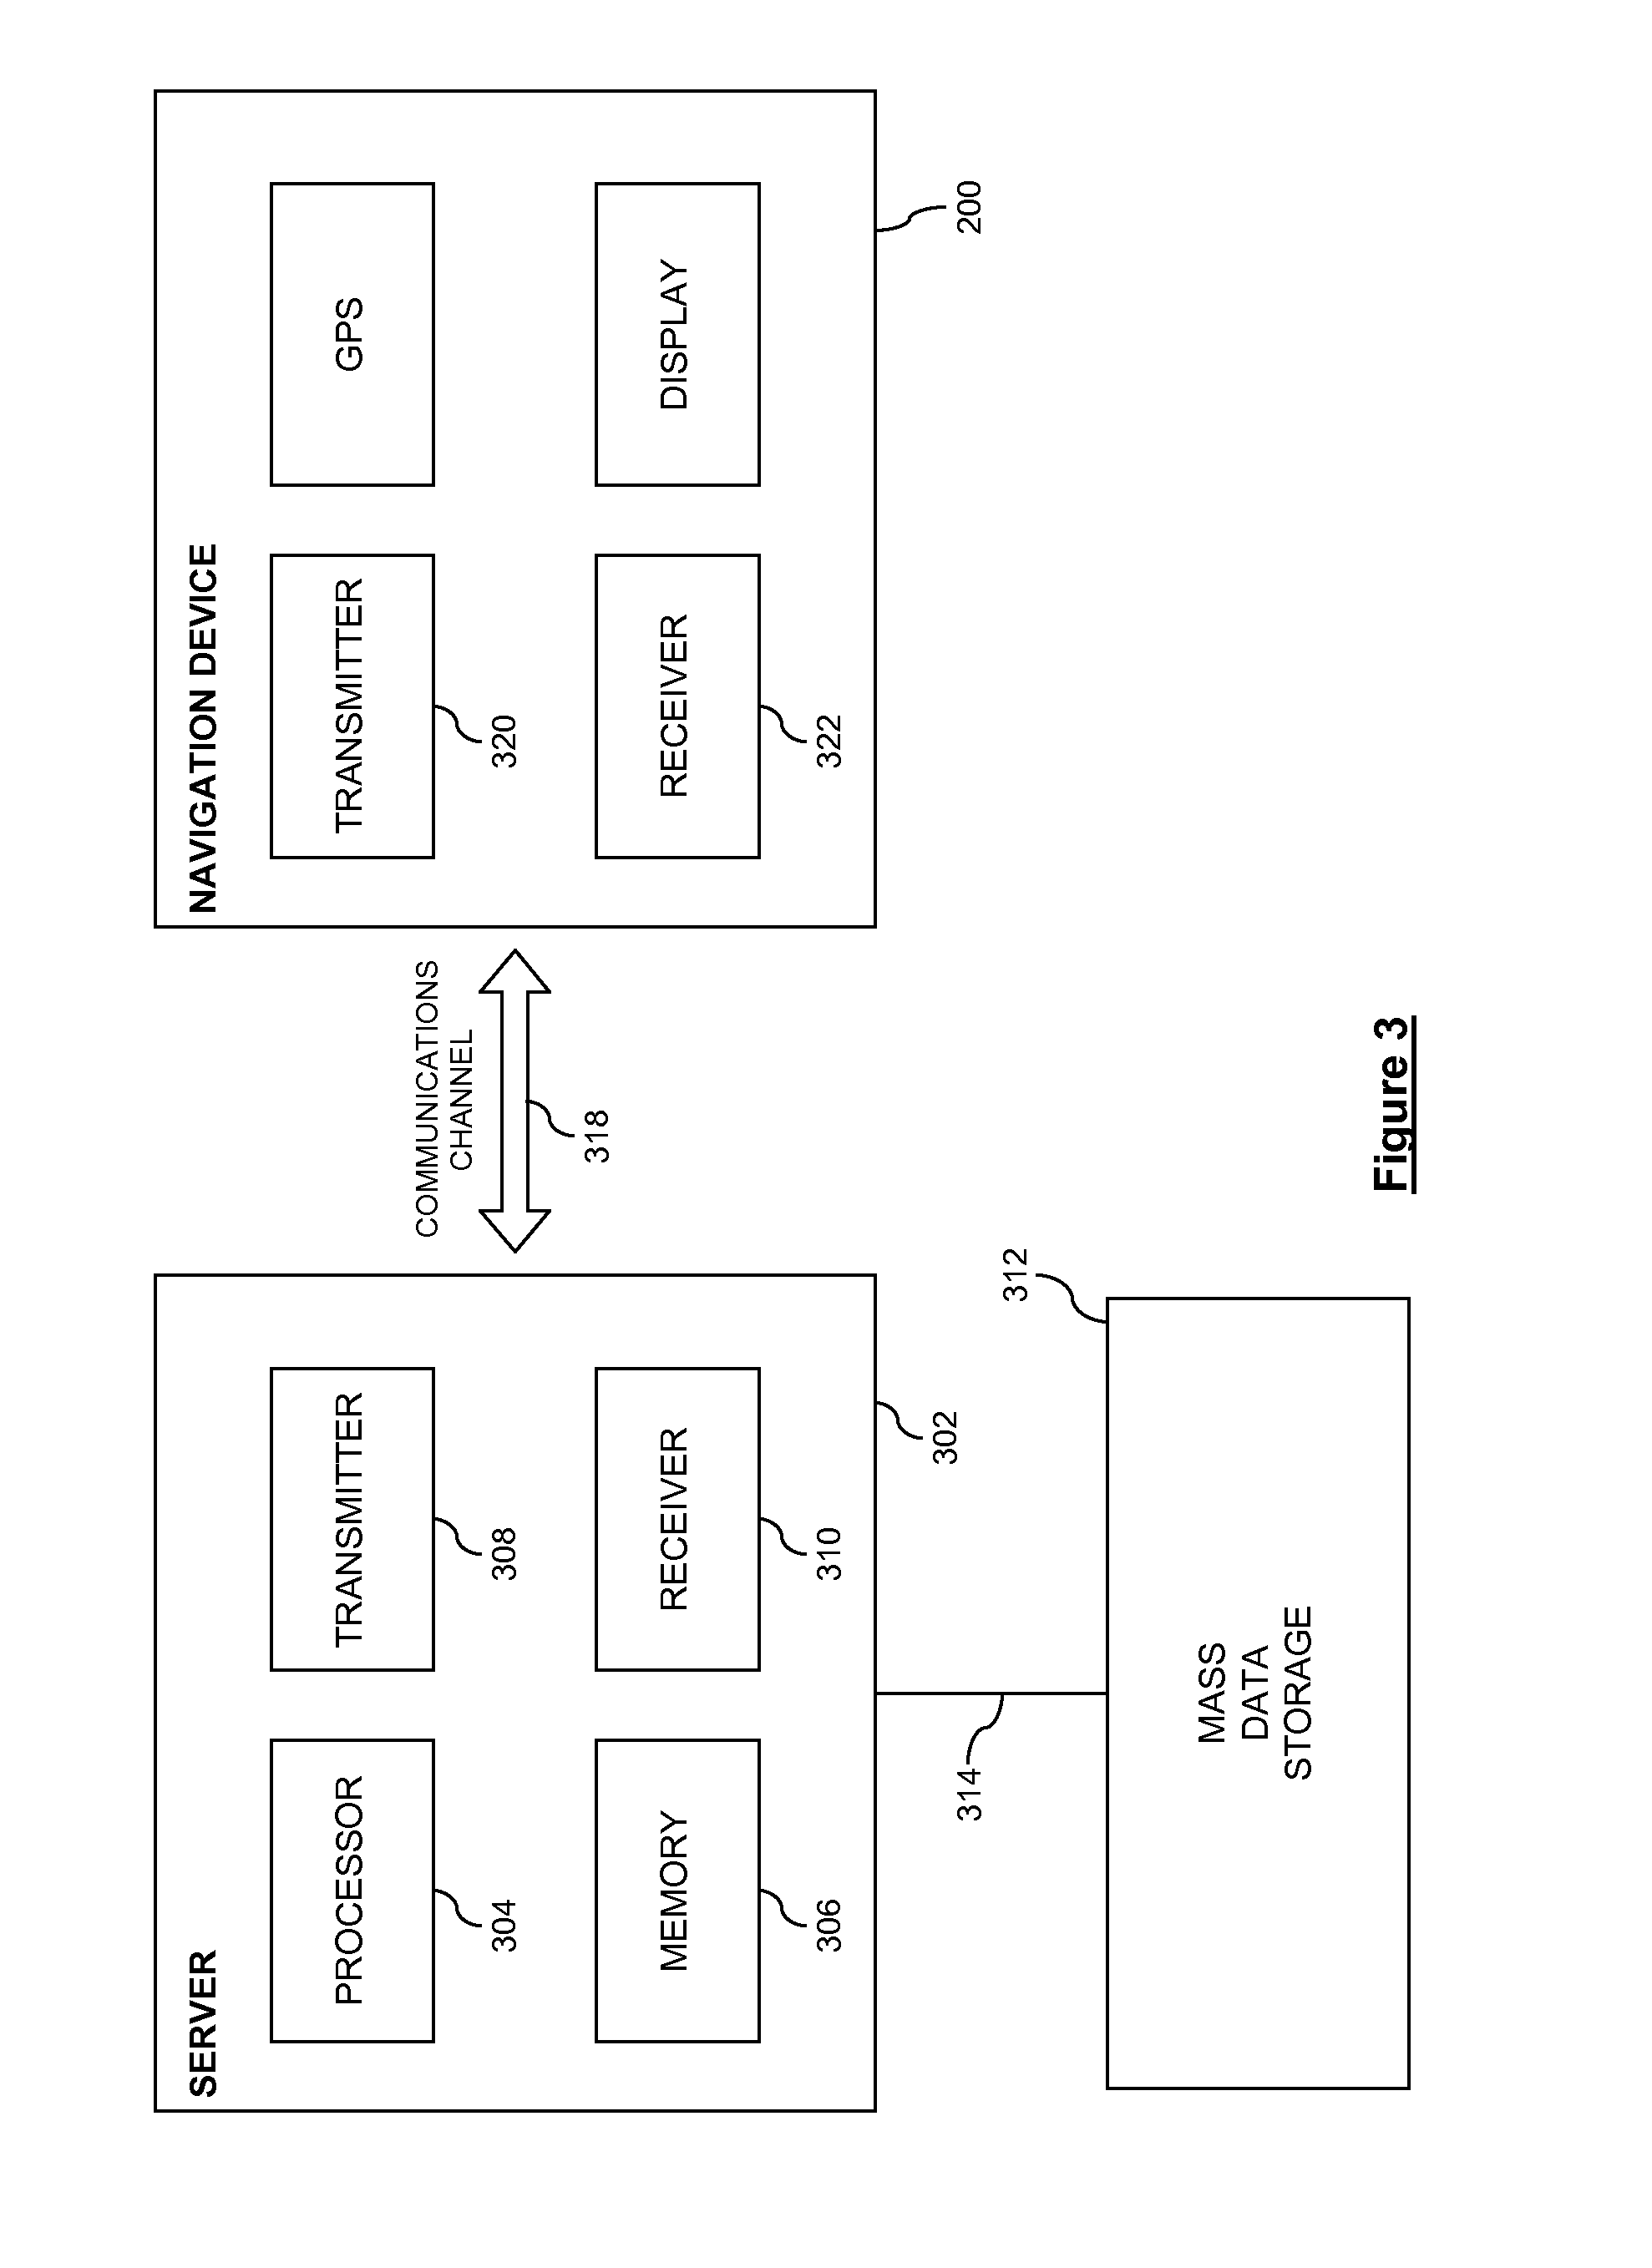 Methods and apparatus for providing travel information